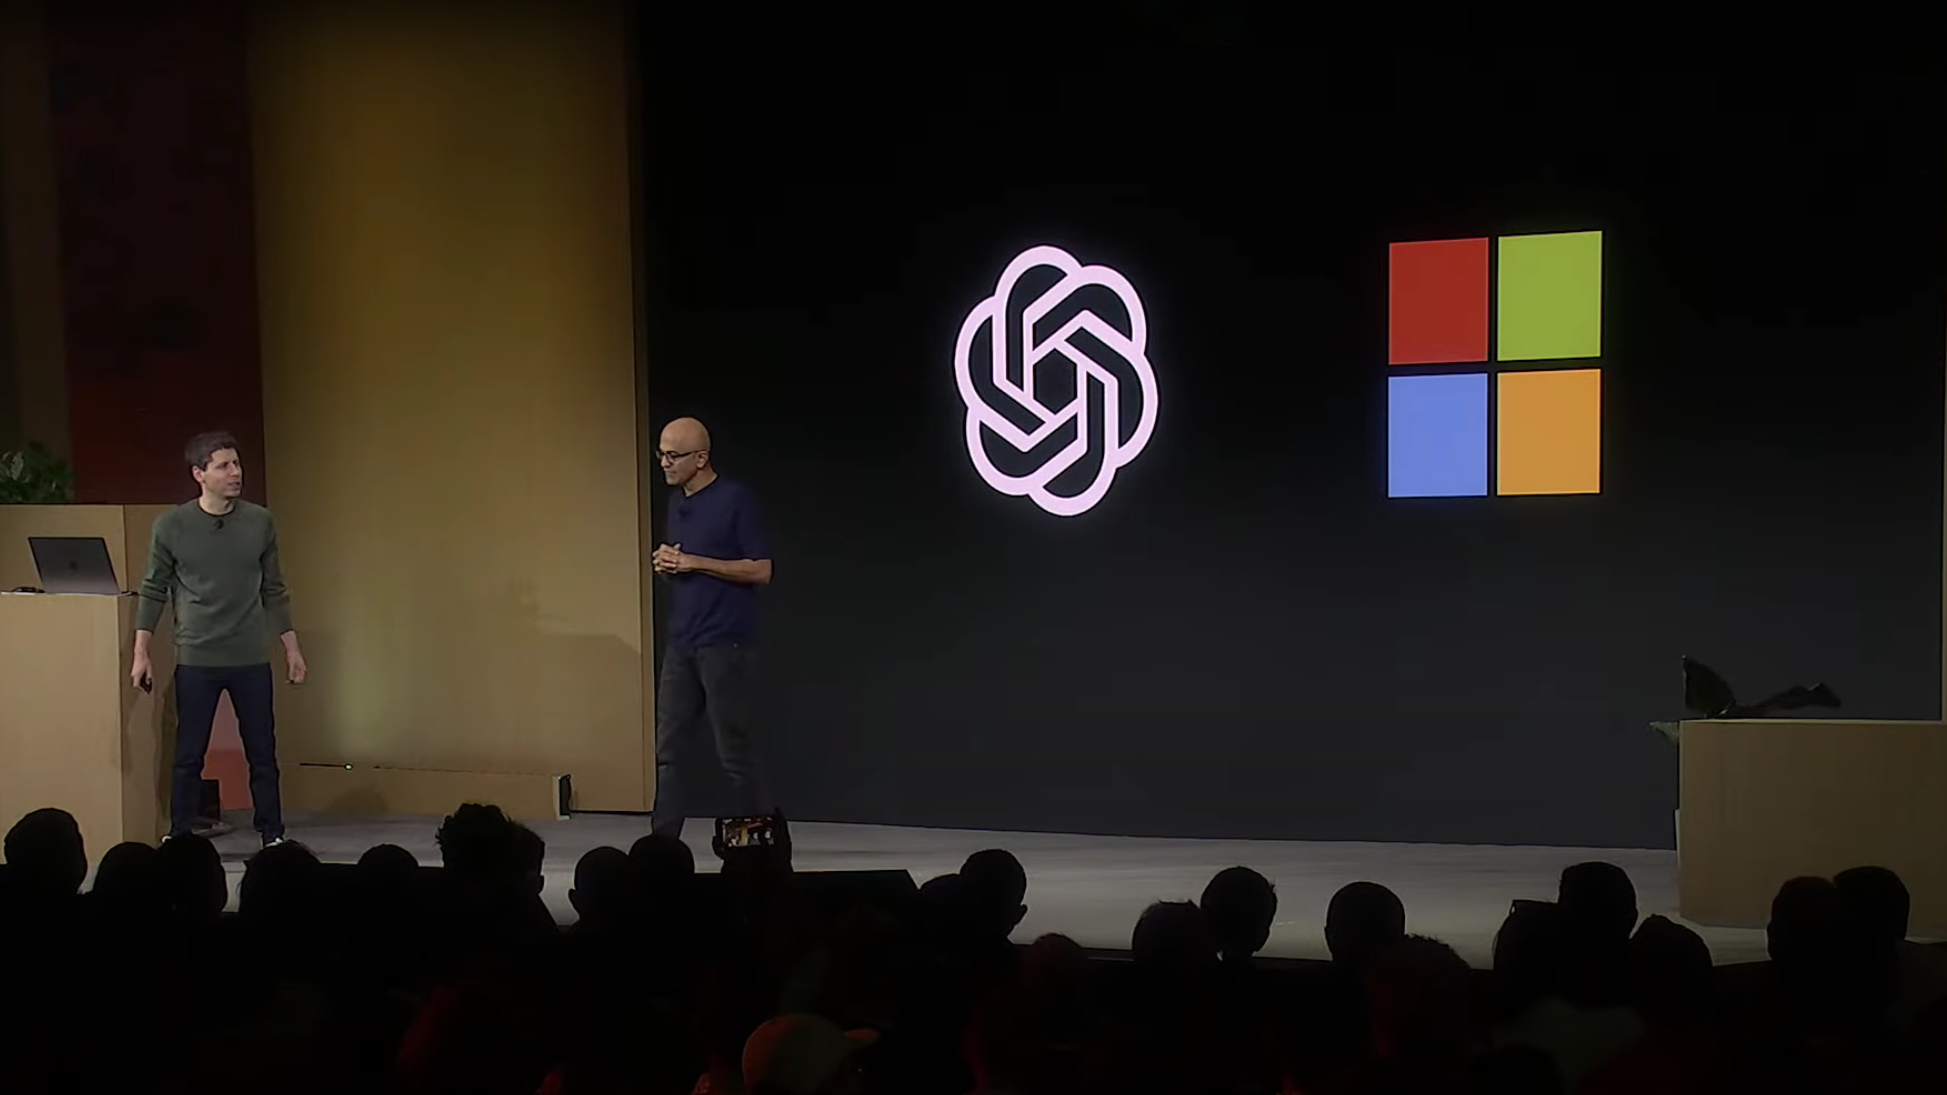 Microsoft and OpenAI bet $100 billion to free themselves from the shackles and overreliance on the world's most profitable semiconductor chip brand for AI chips